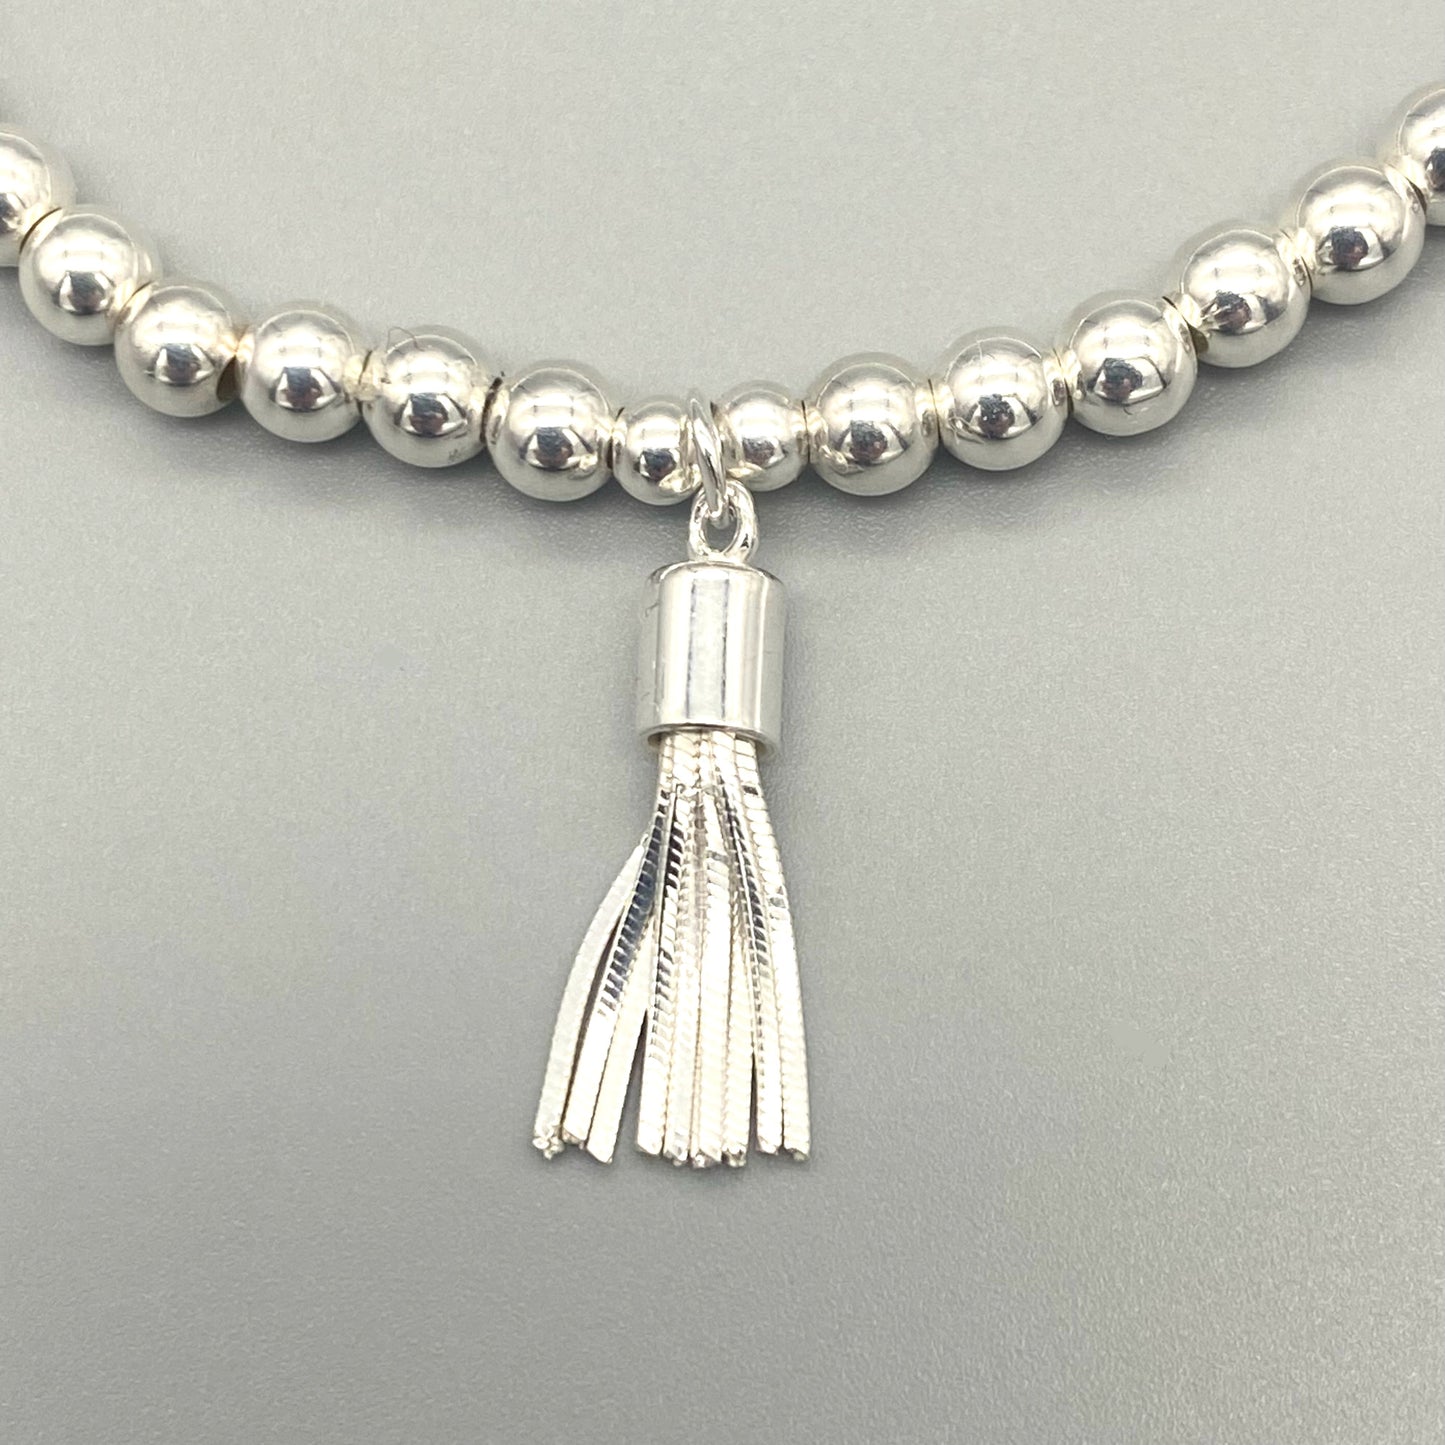 Closeup of Tassel charm sterling silver women's beaded stacking bracelet by My Silver Wish